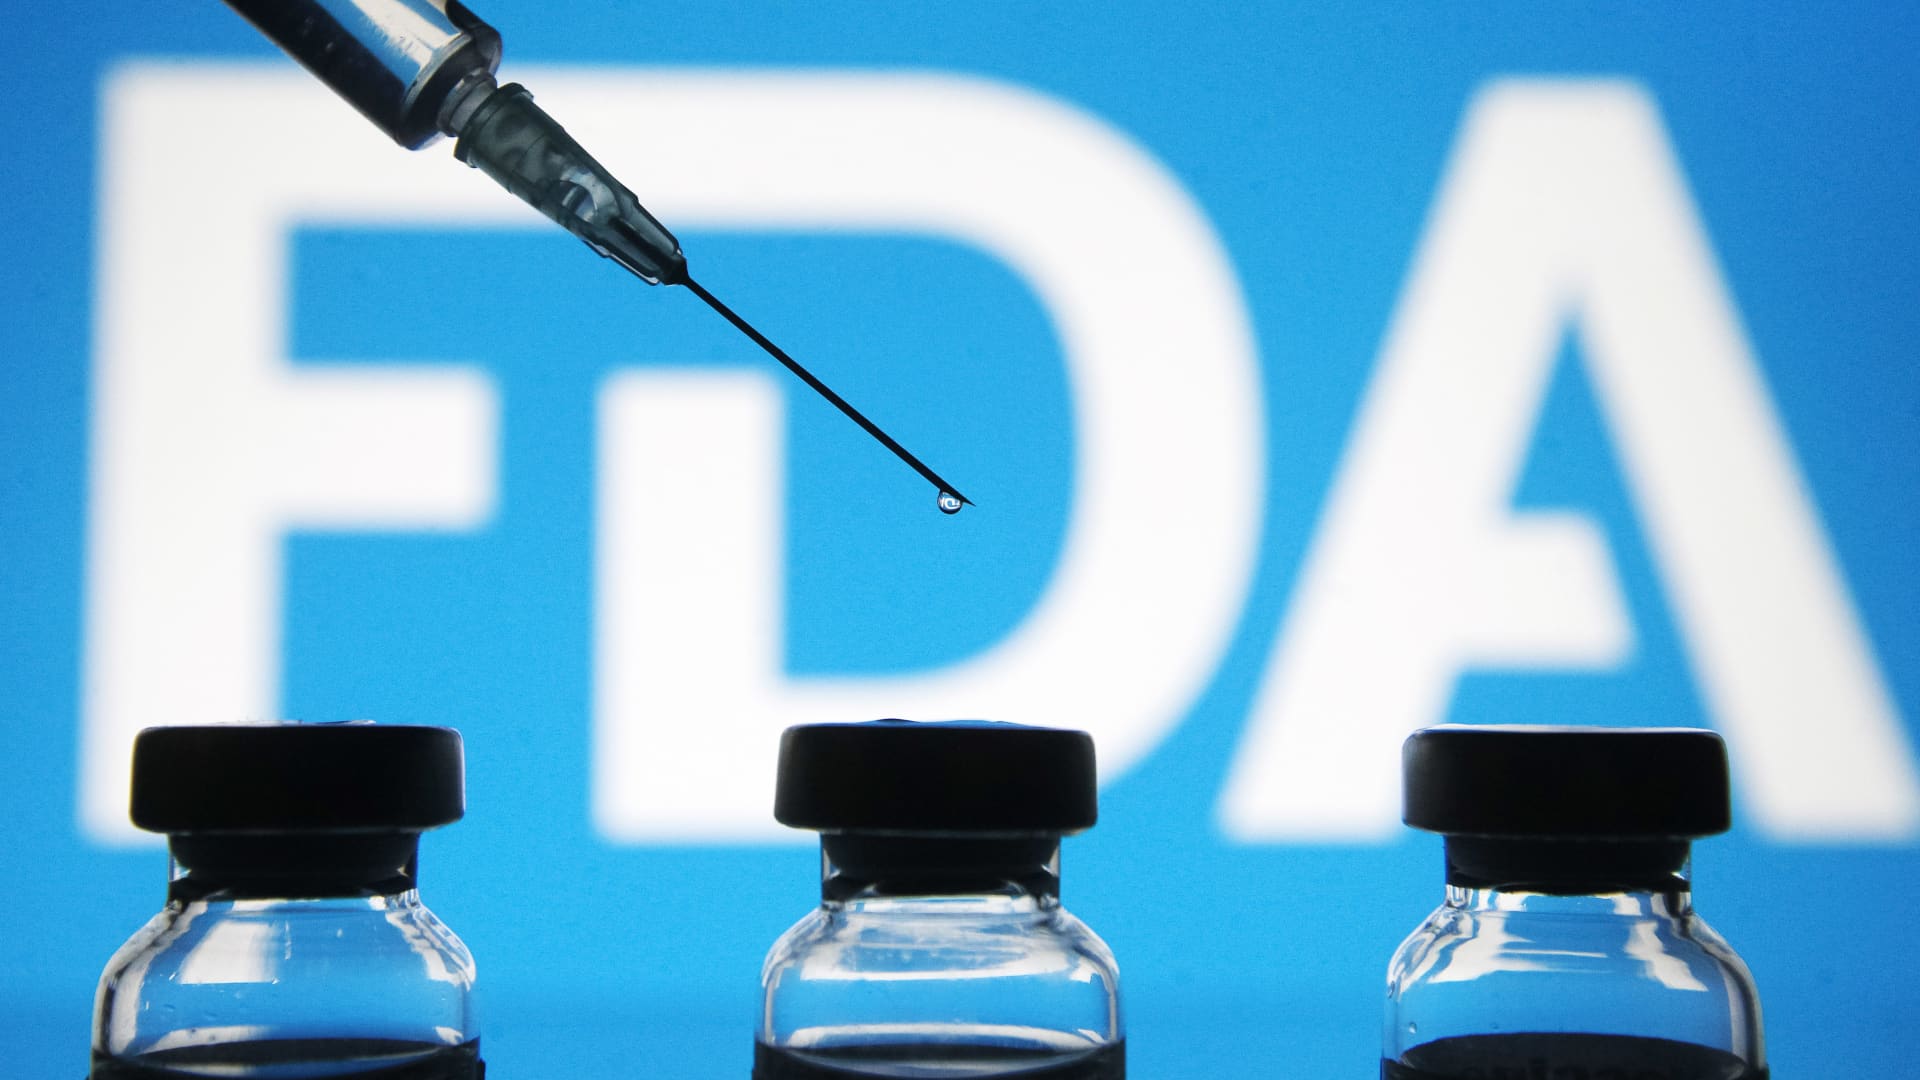 The end of the Covid health emergency won't slow FDA clearance of shots and treatments